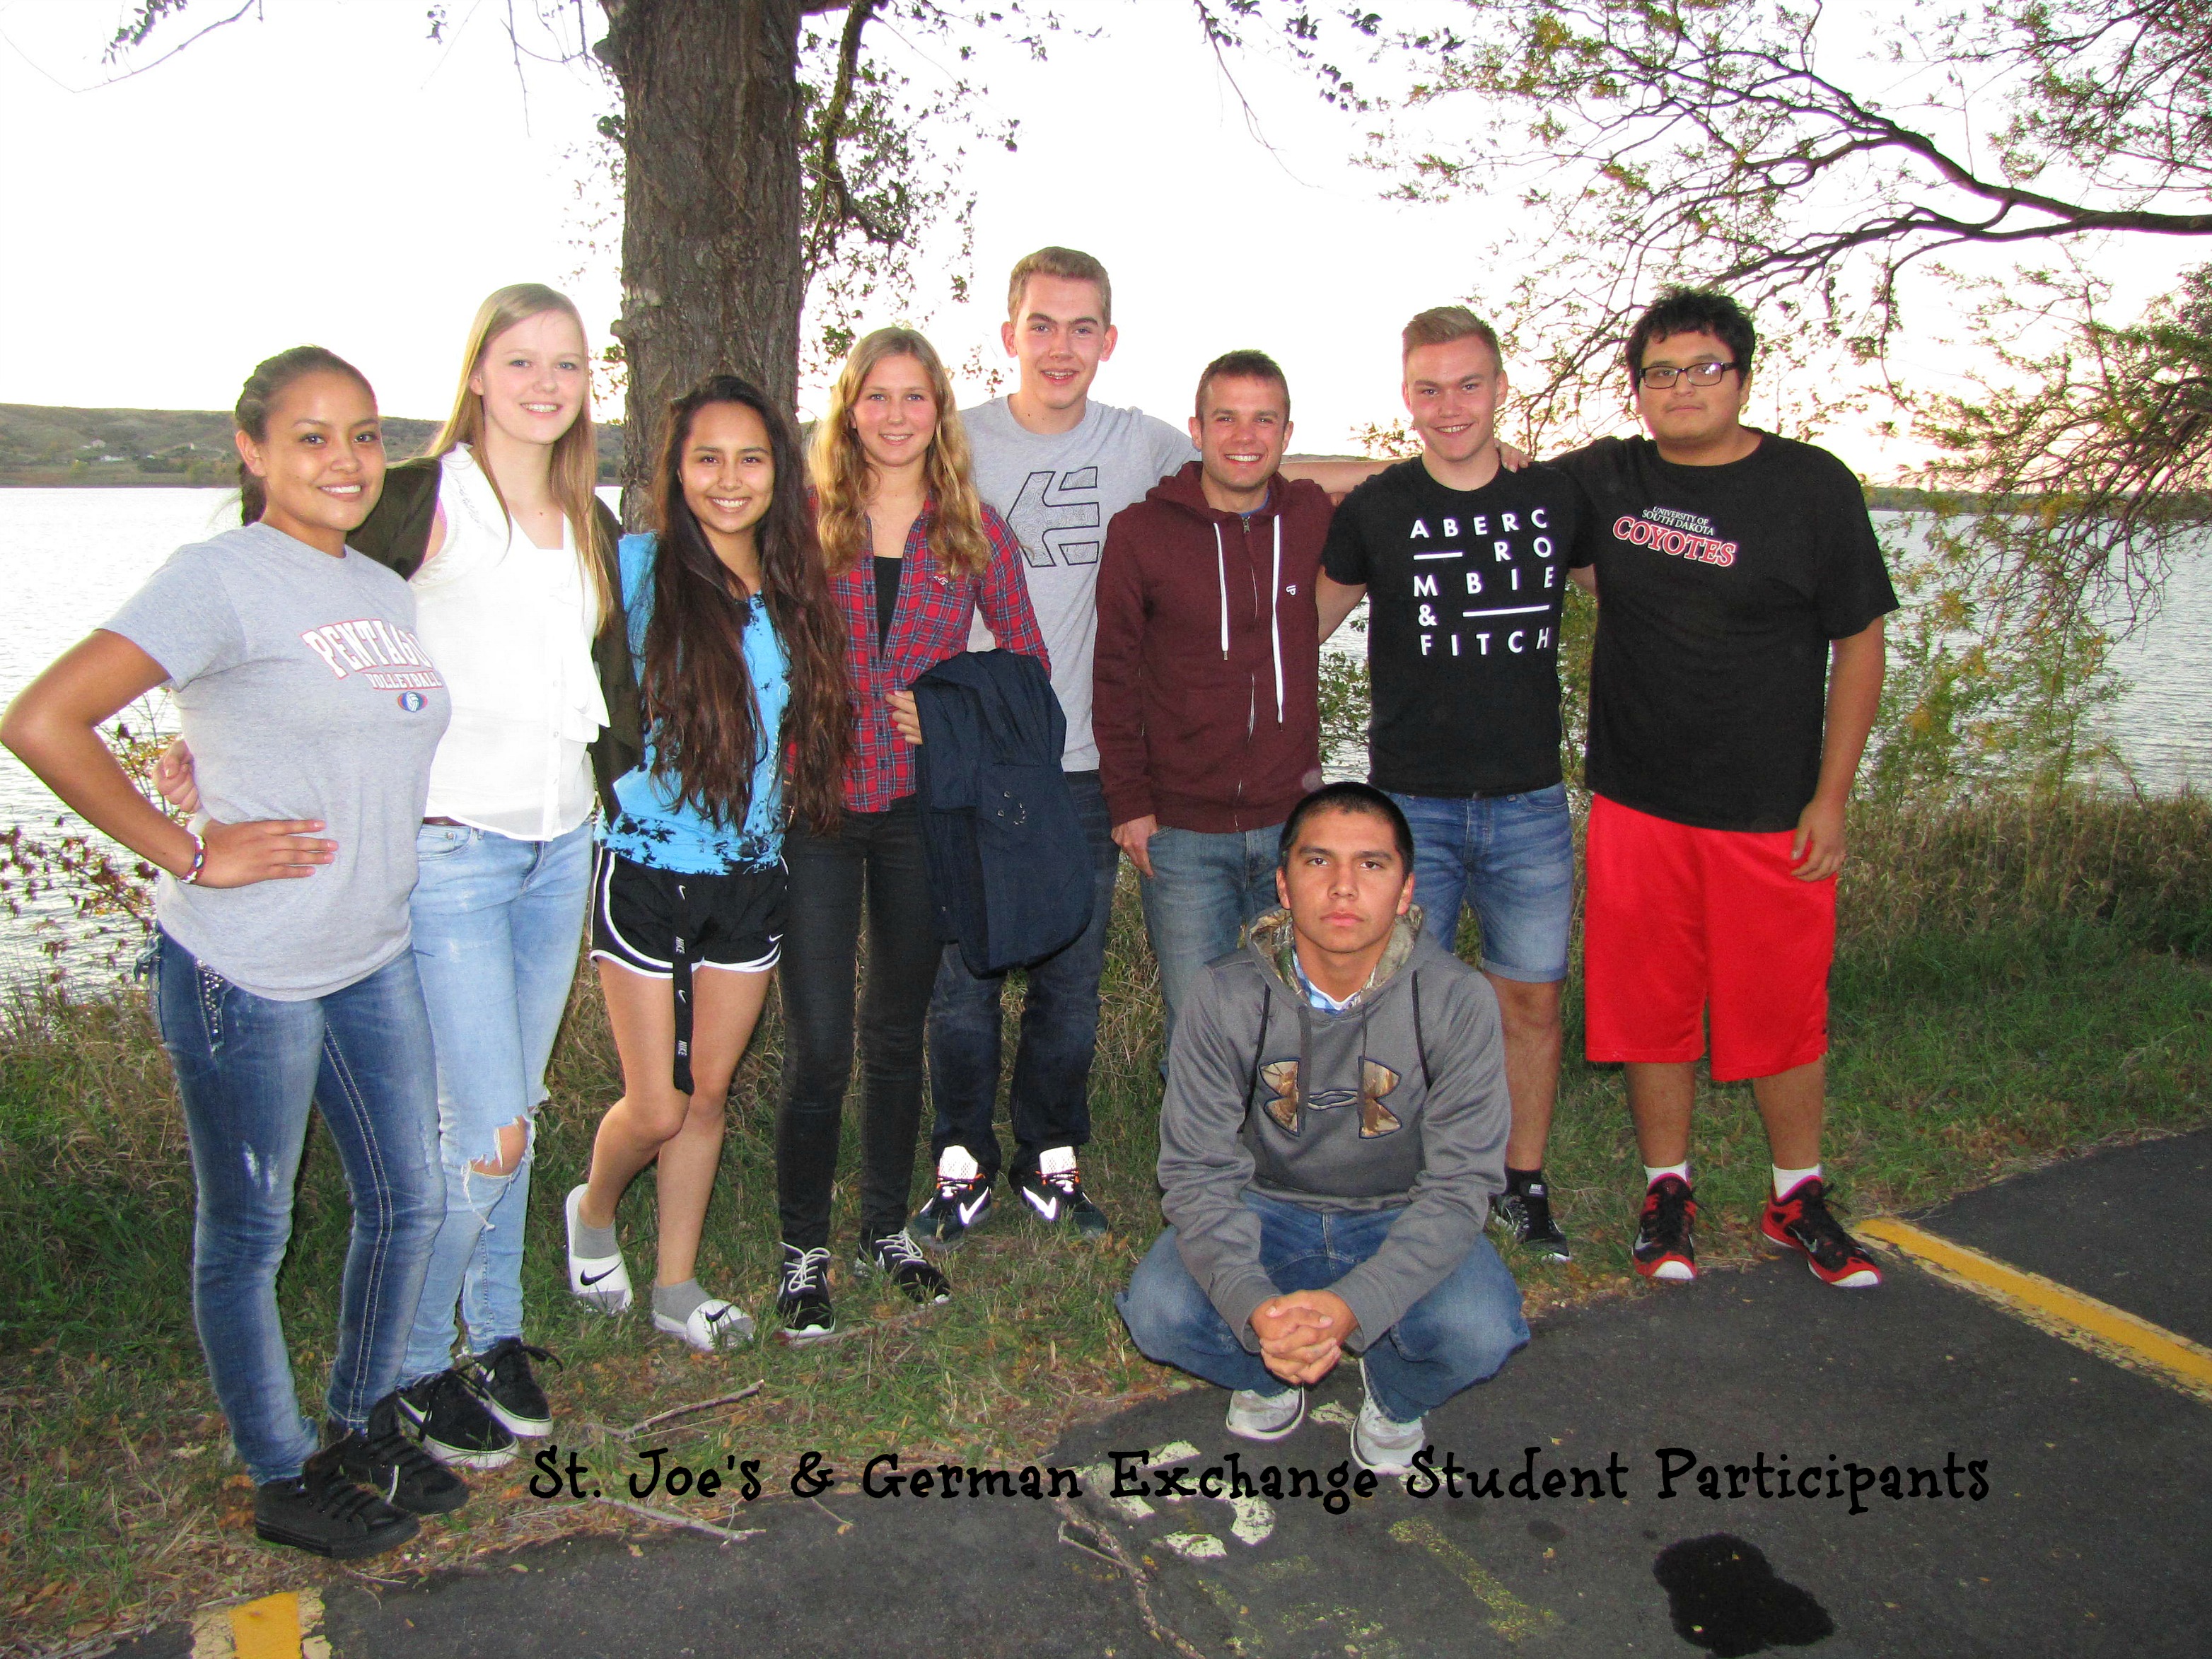 Lakota (Sioux) students with German students